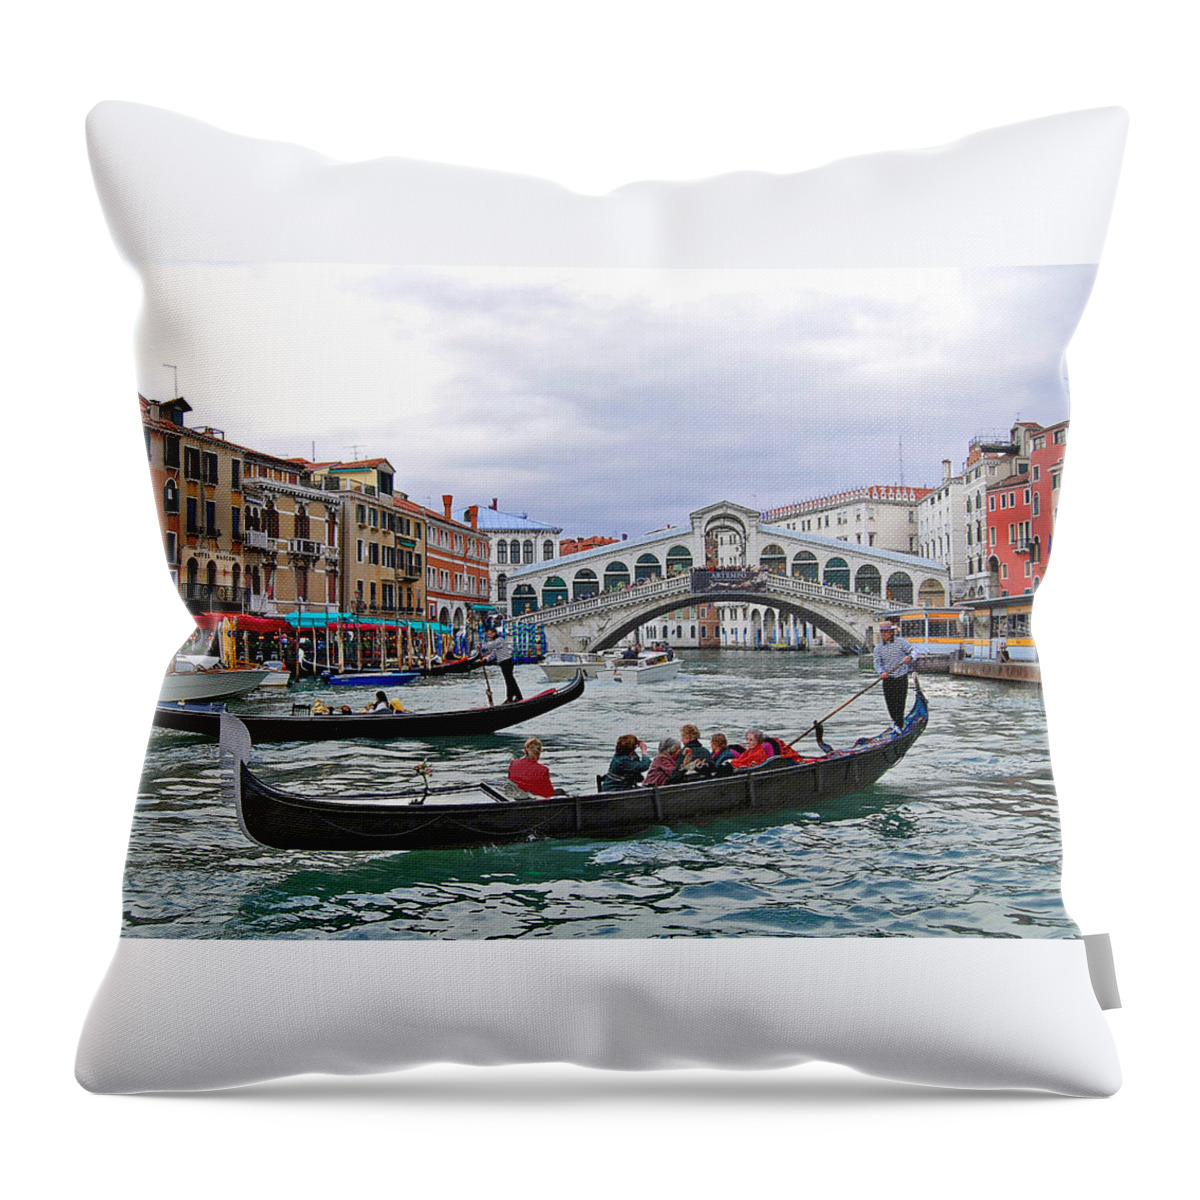 Venice Throw Pillow featuring the photograph Grand Canal Scene by Caroline Stella